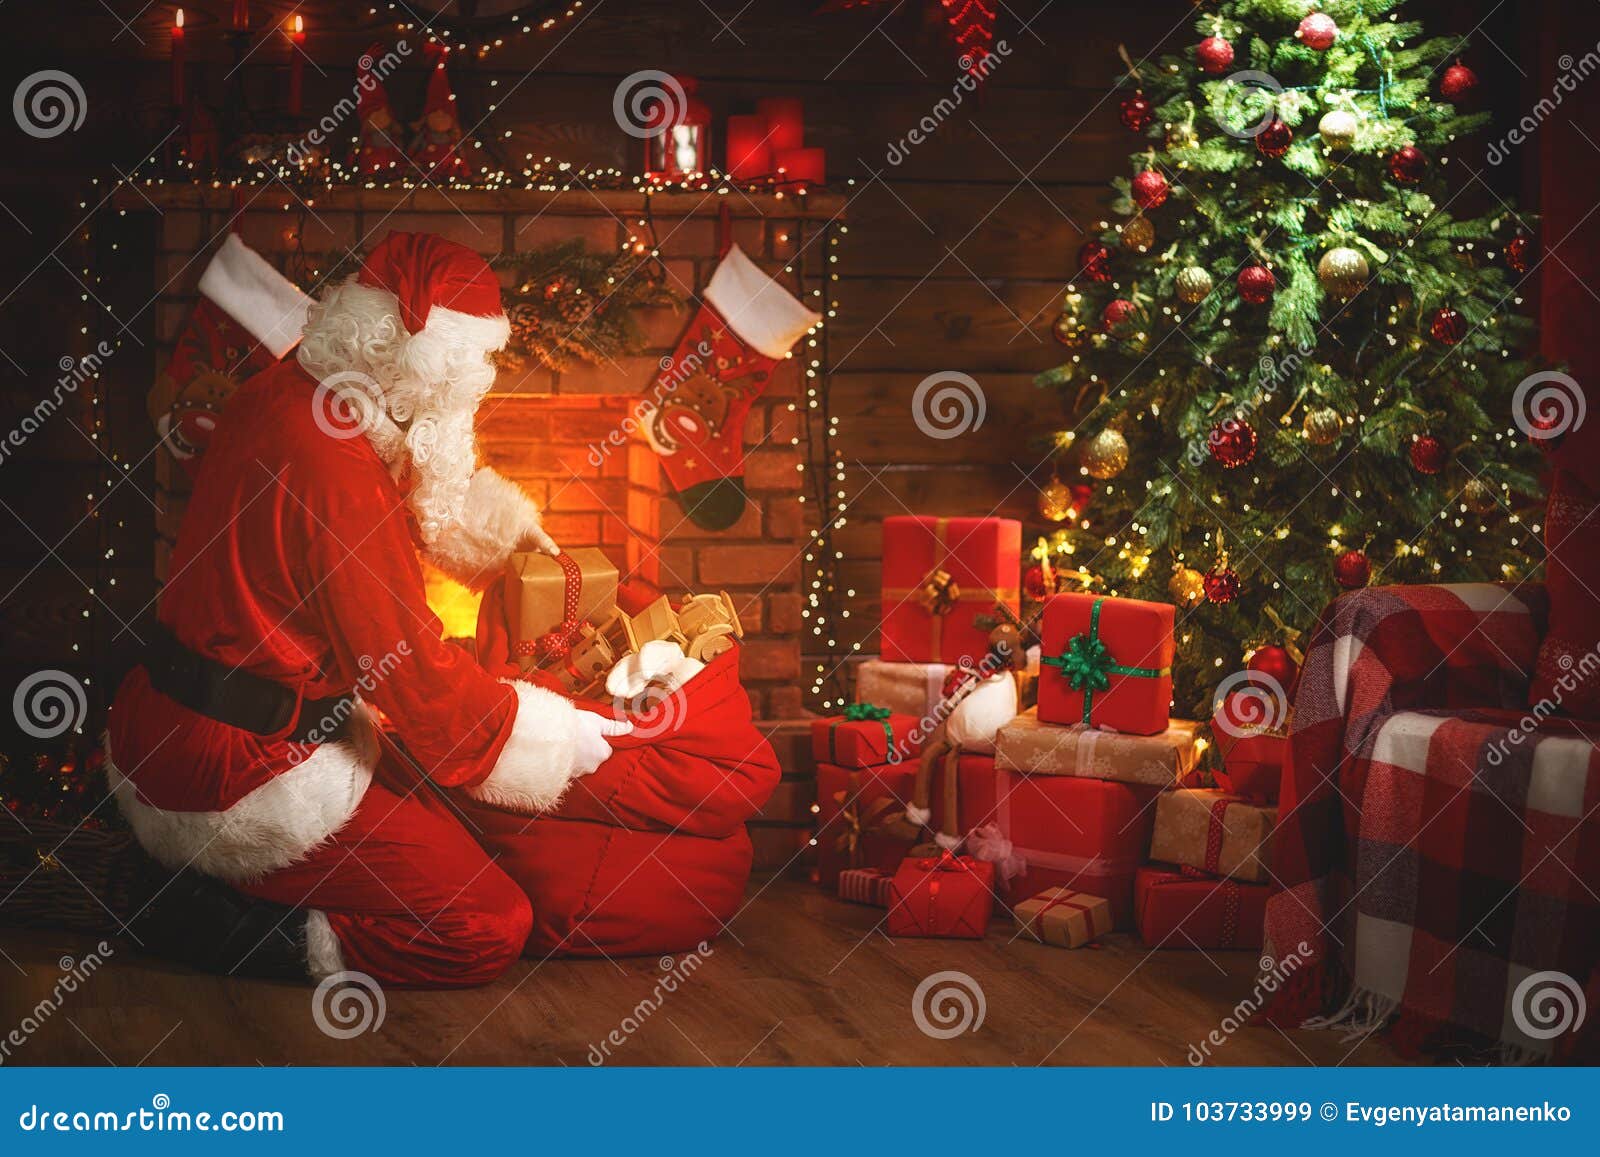 merry christmas! santa claus near the fireplace and tree with gi